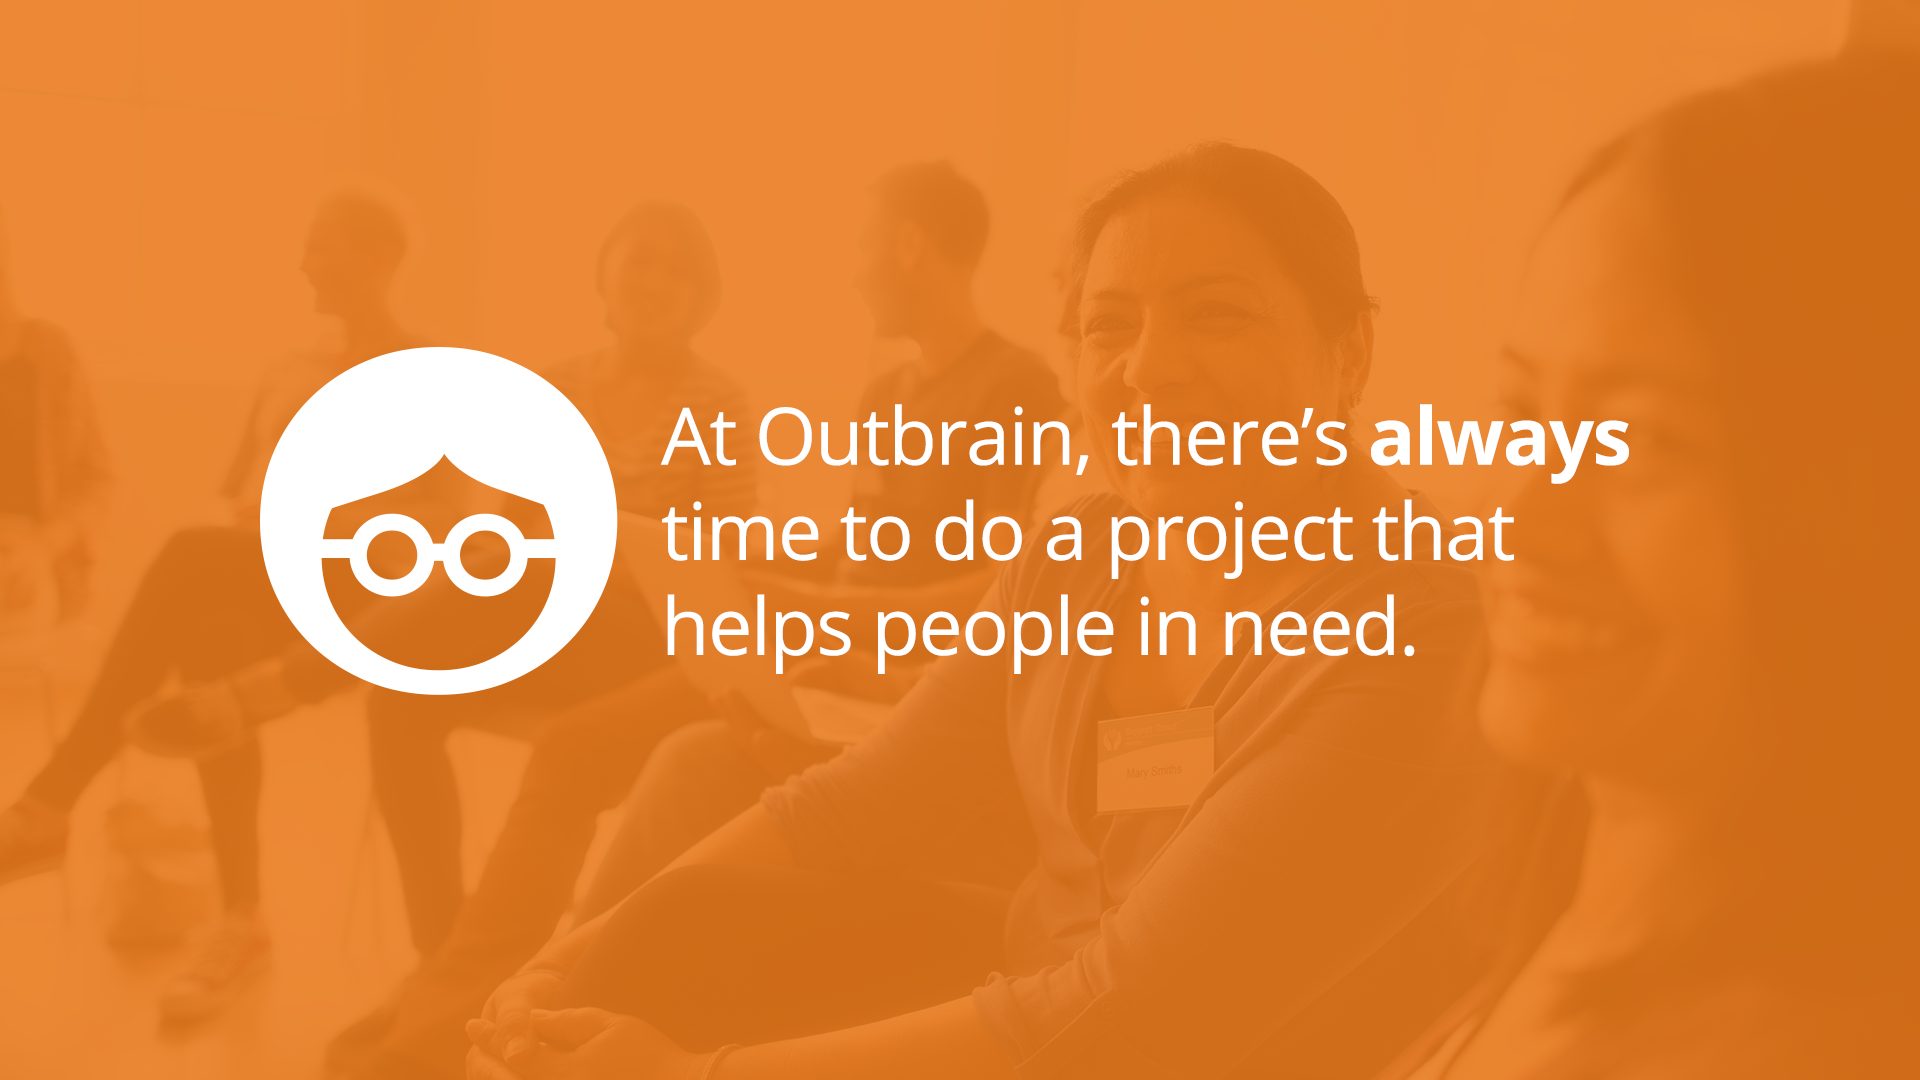 Happy Holidays, From Outbrain